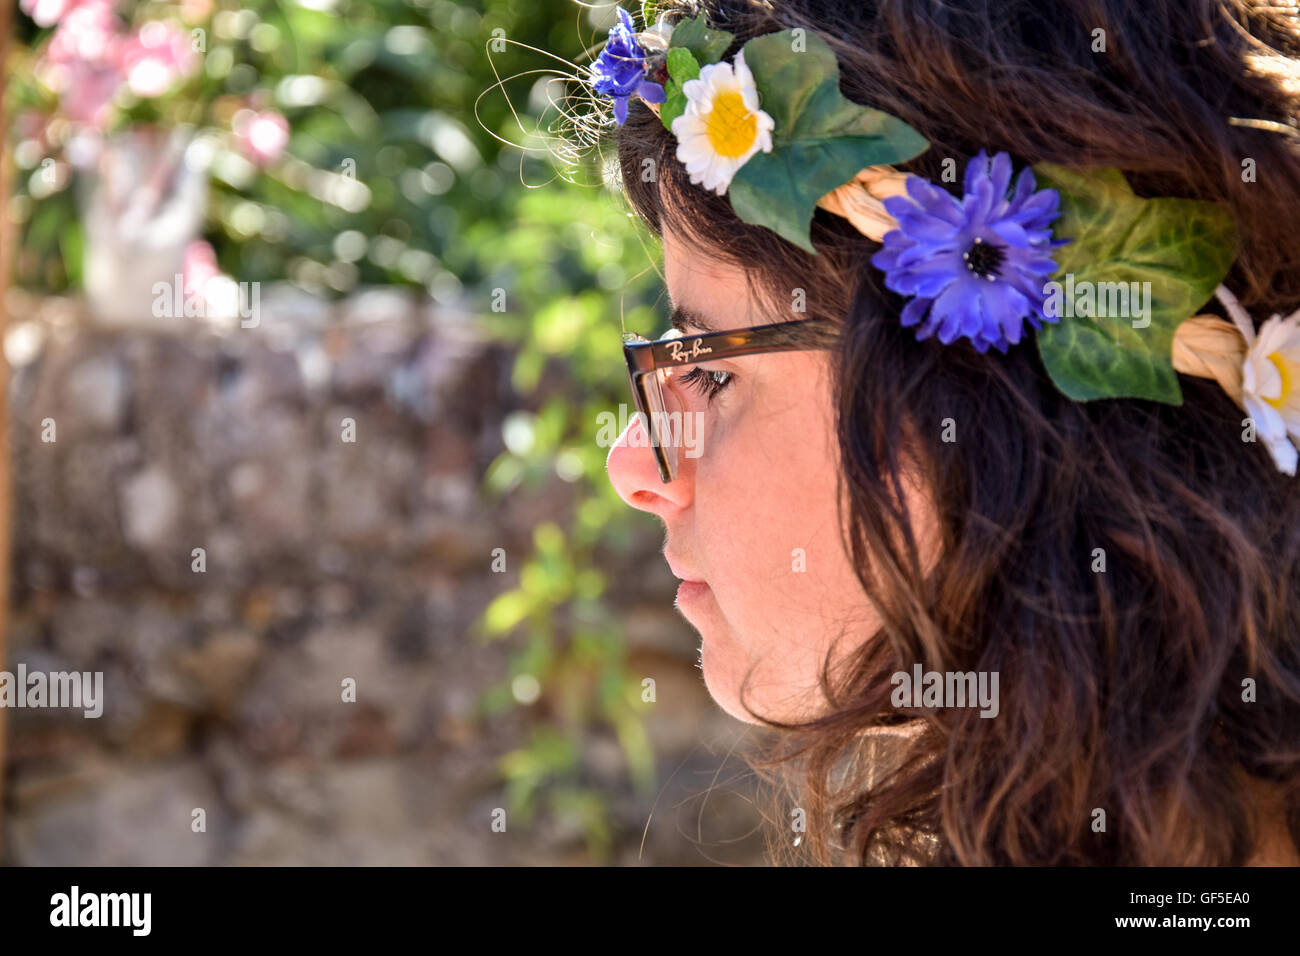 girl with a wreath of flowers Stock Photo